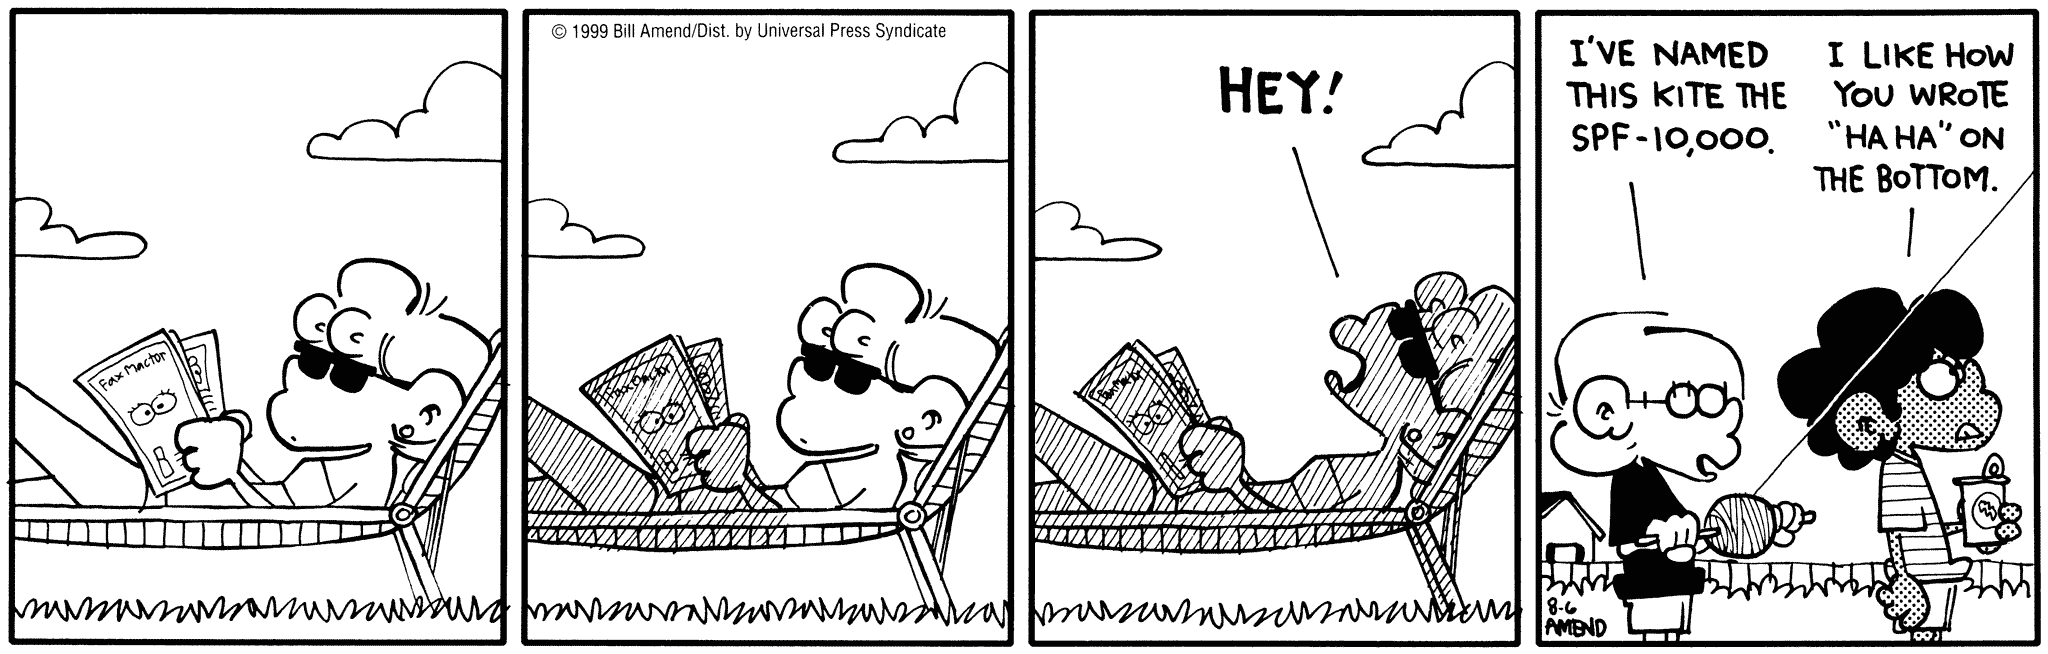 FoxTrot by Bill Amend August 6, 1999 - Summer Comics - Paige: HEY! Jason: I've named this kite the SPF - 10,000. Marcus: I like how you wrote "ha ha" on the bottom.